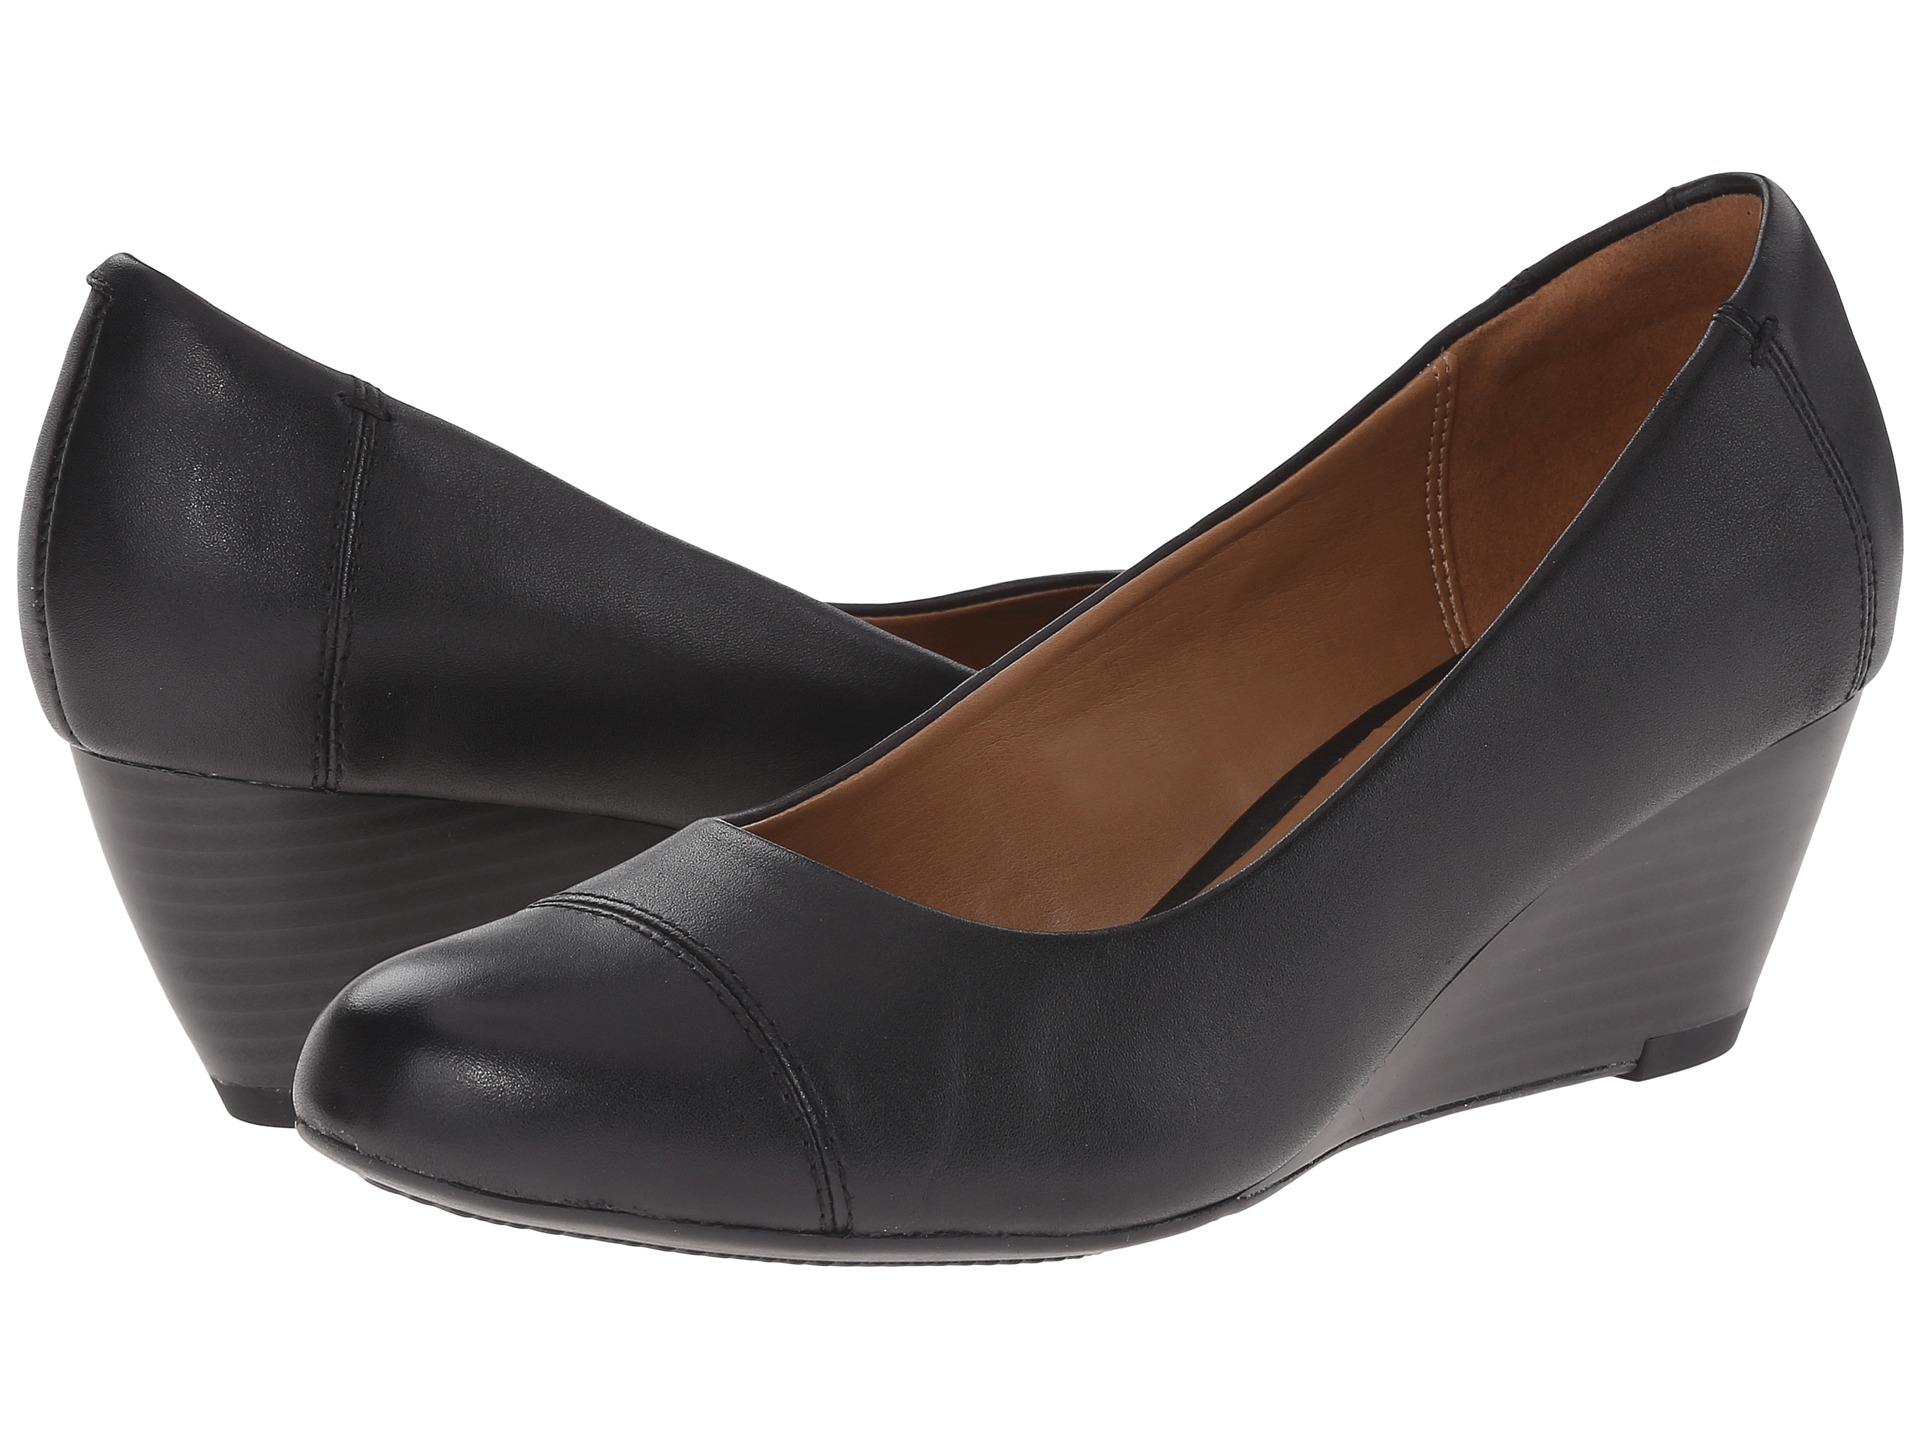 Clarks Brielle Chanel Black Leather - Zappos.com Free Shipping BOTH Ways